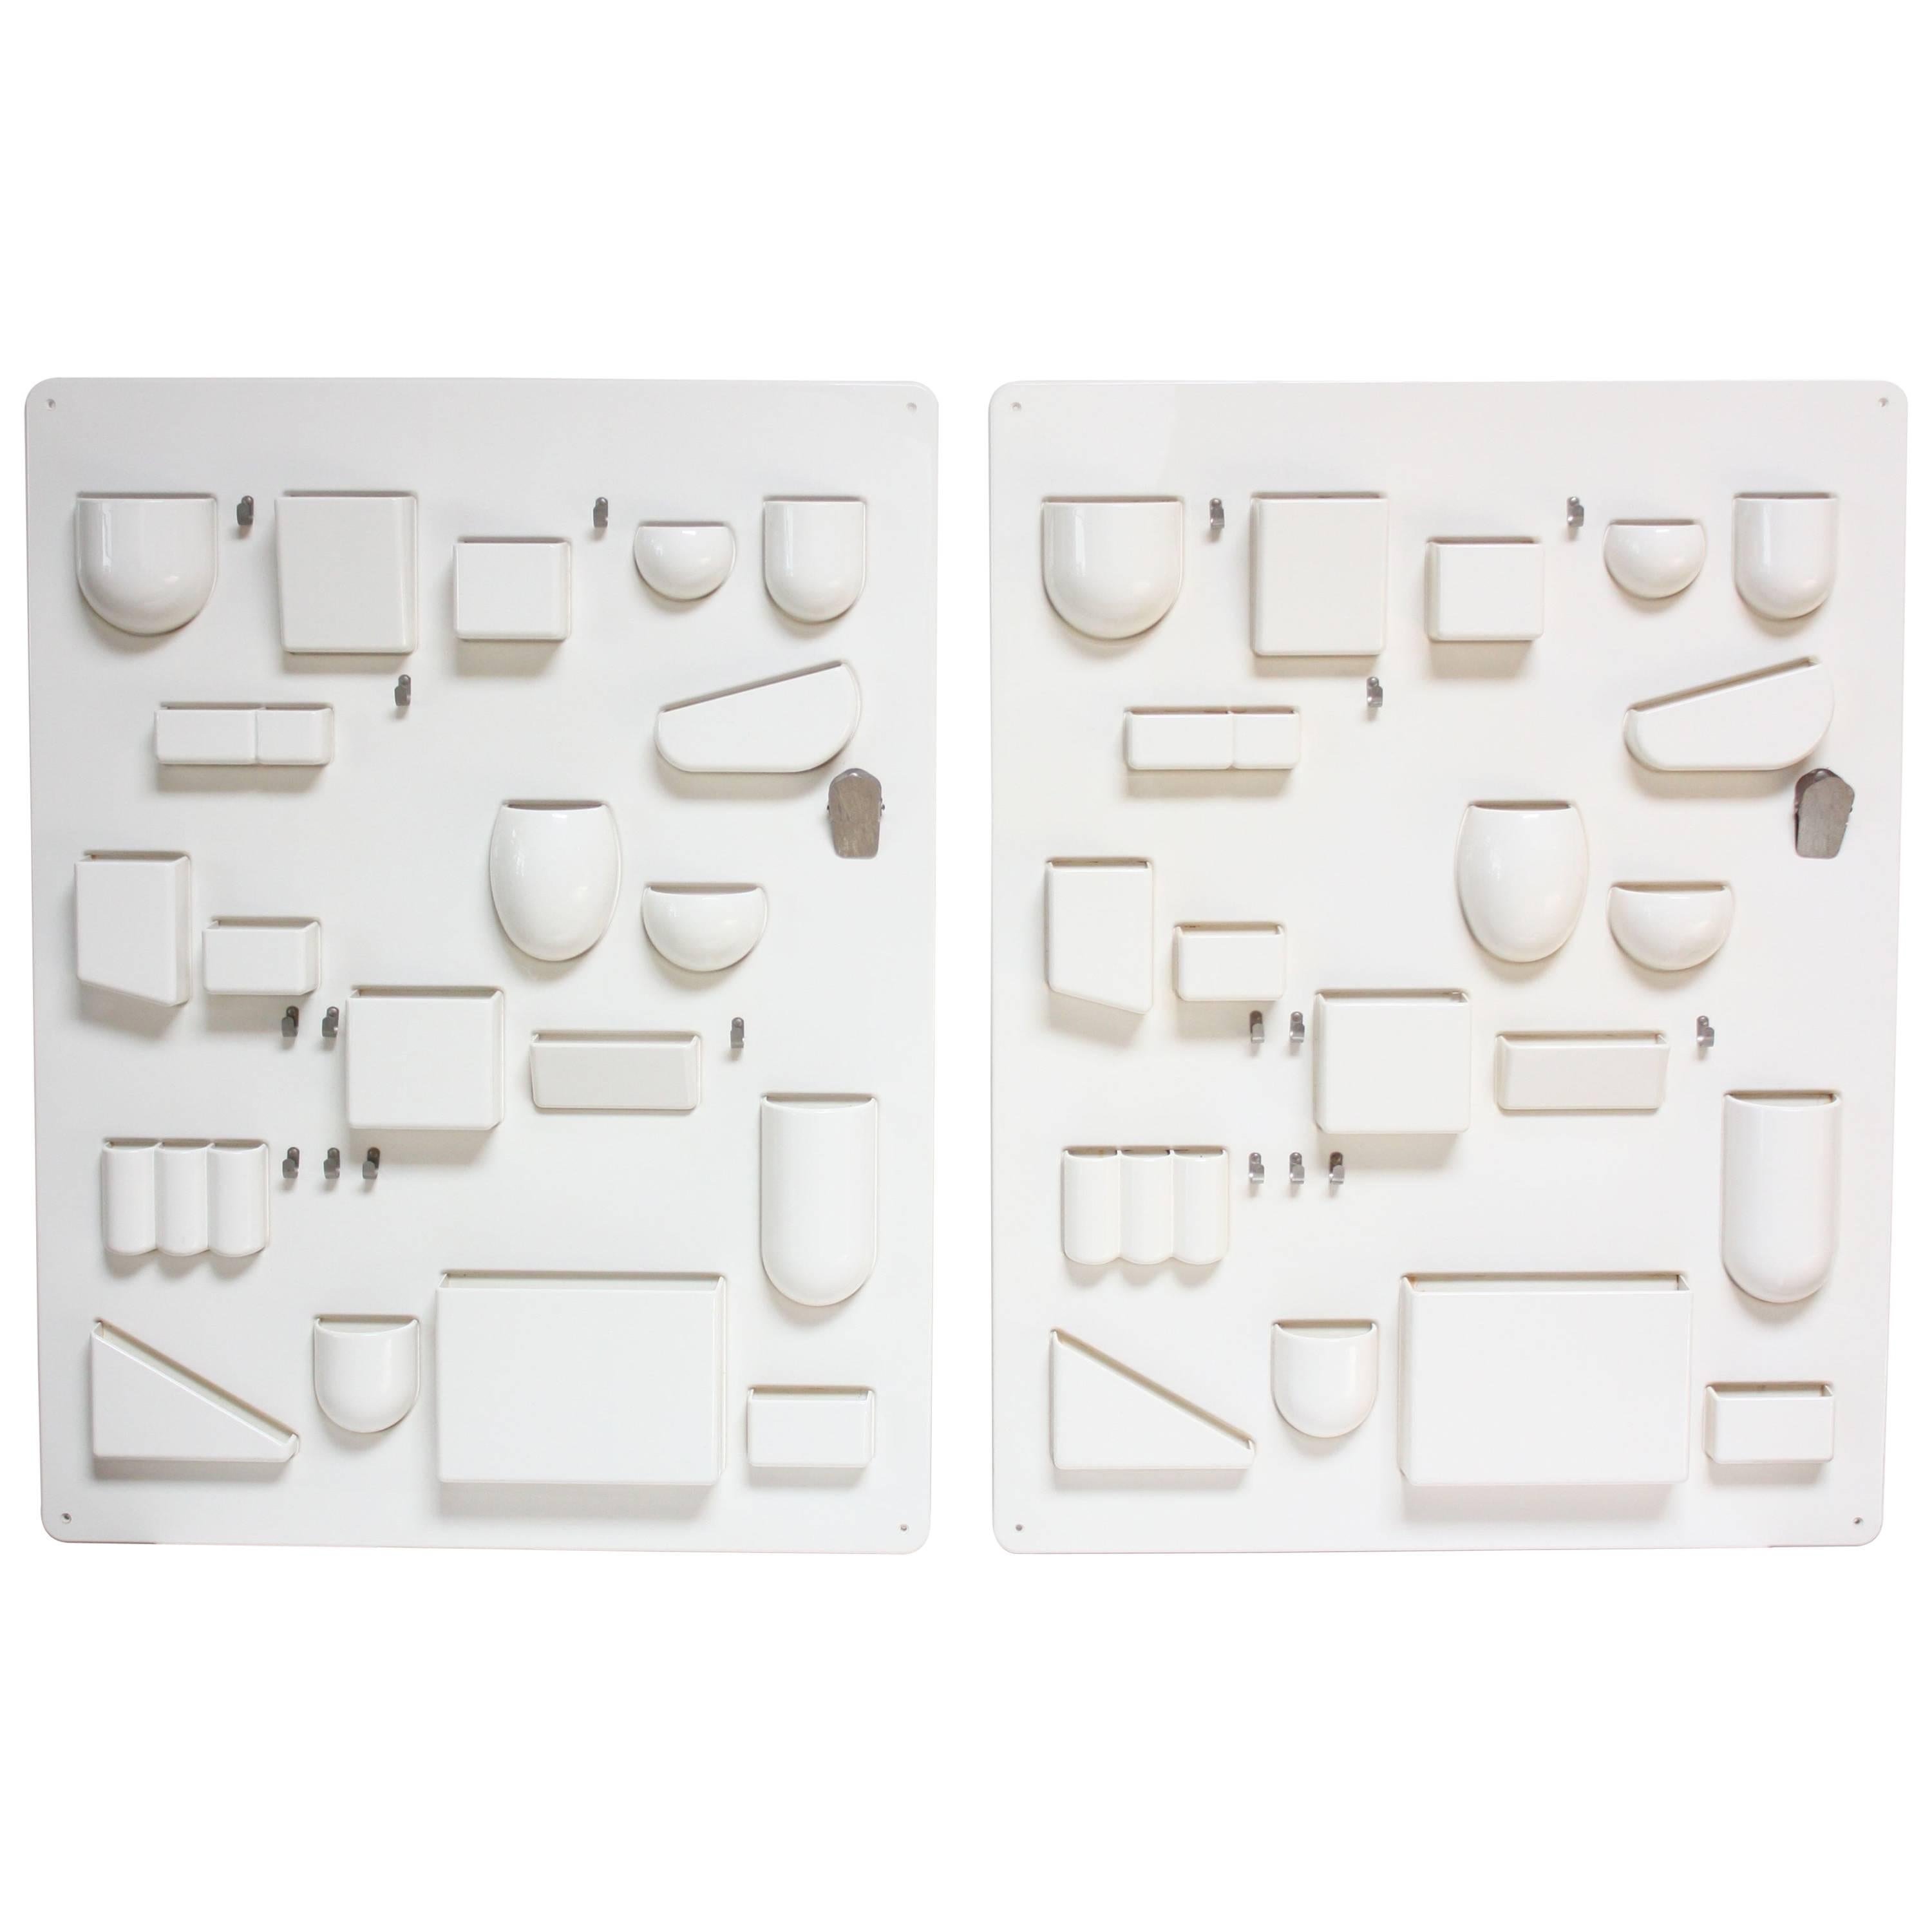 Pair of First Edition Uten.Silo I Wall Organizers by Dorothee Maurer-Becker